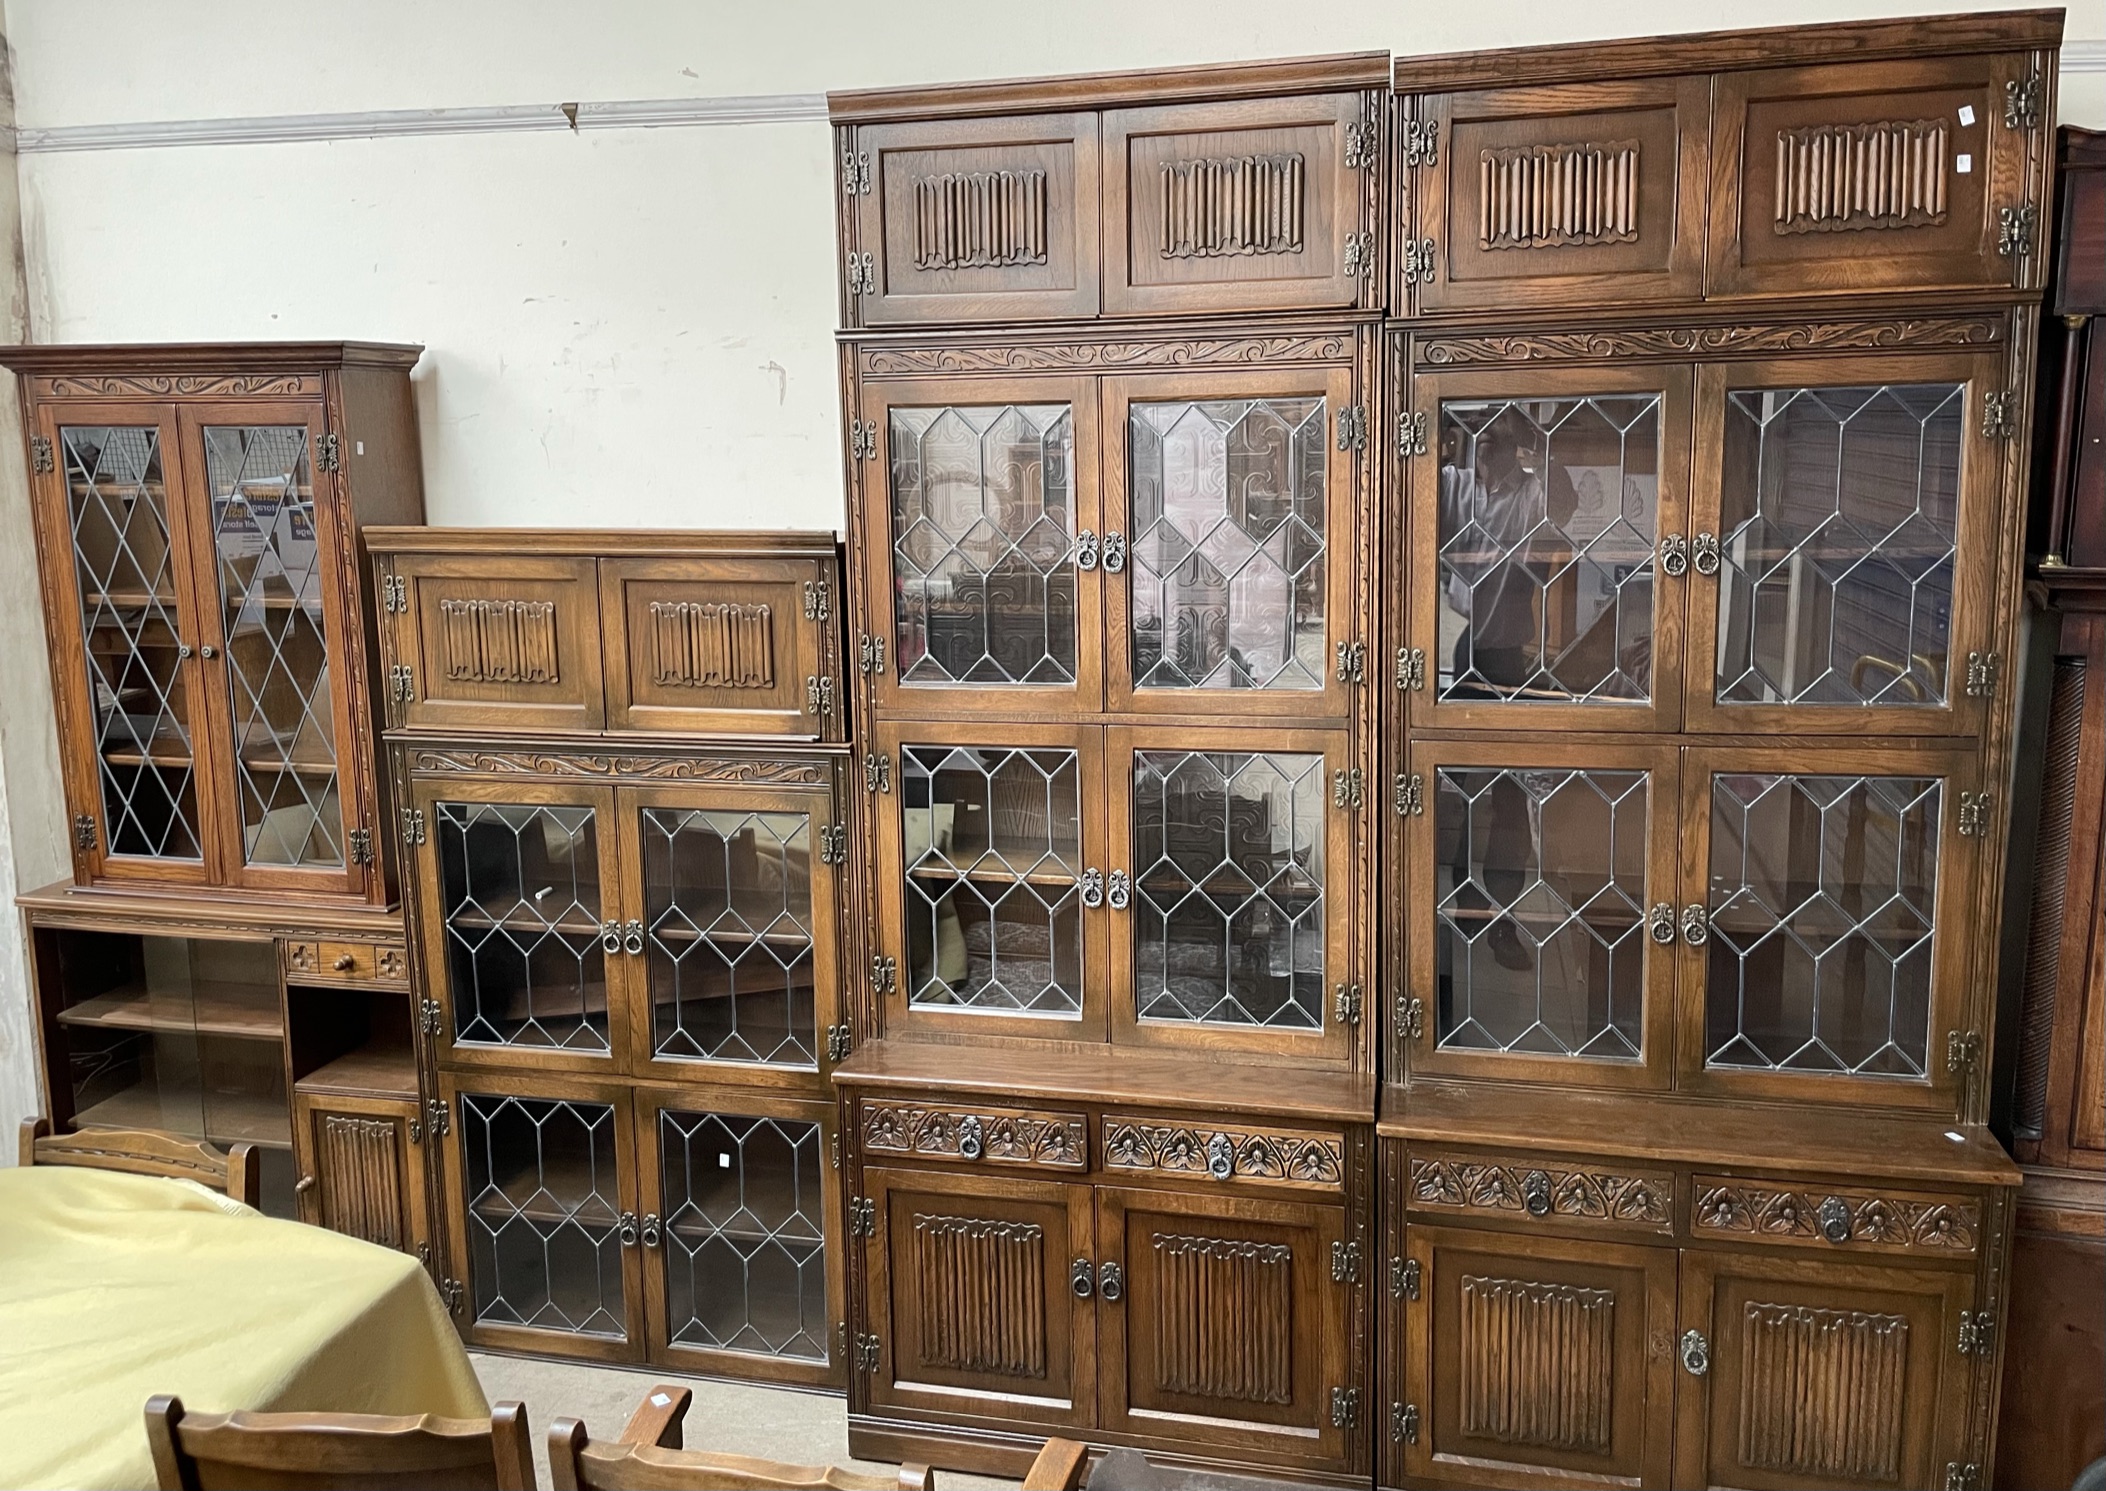 A 20th century oak wall unit with multiple sections,